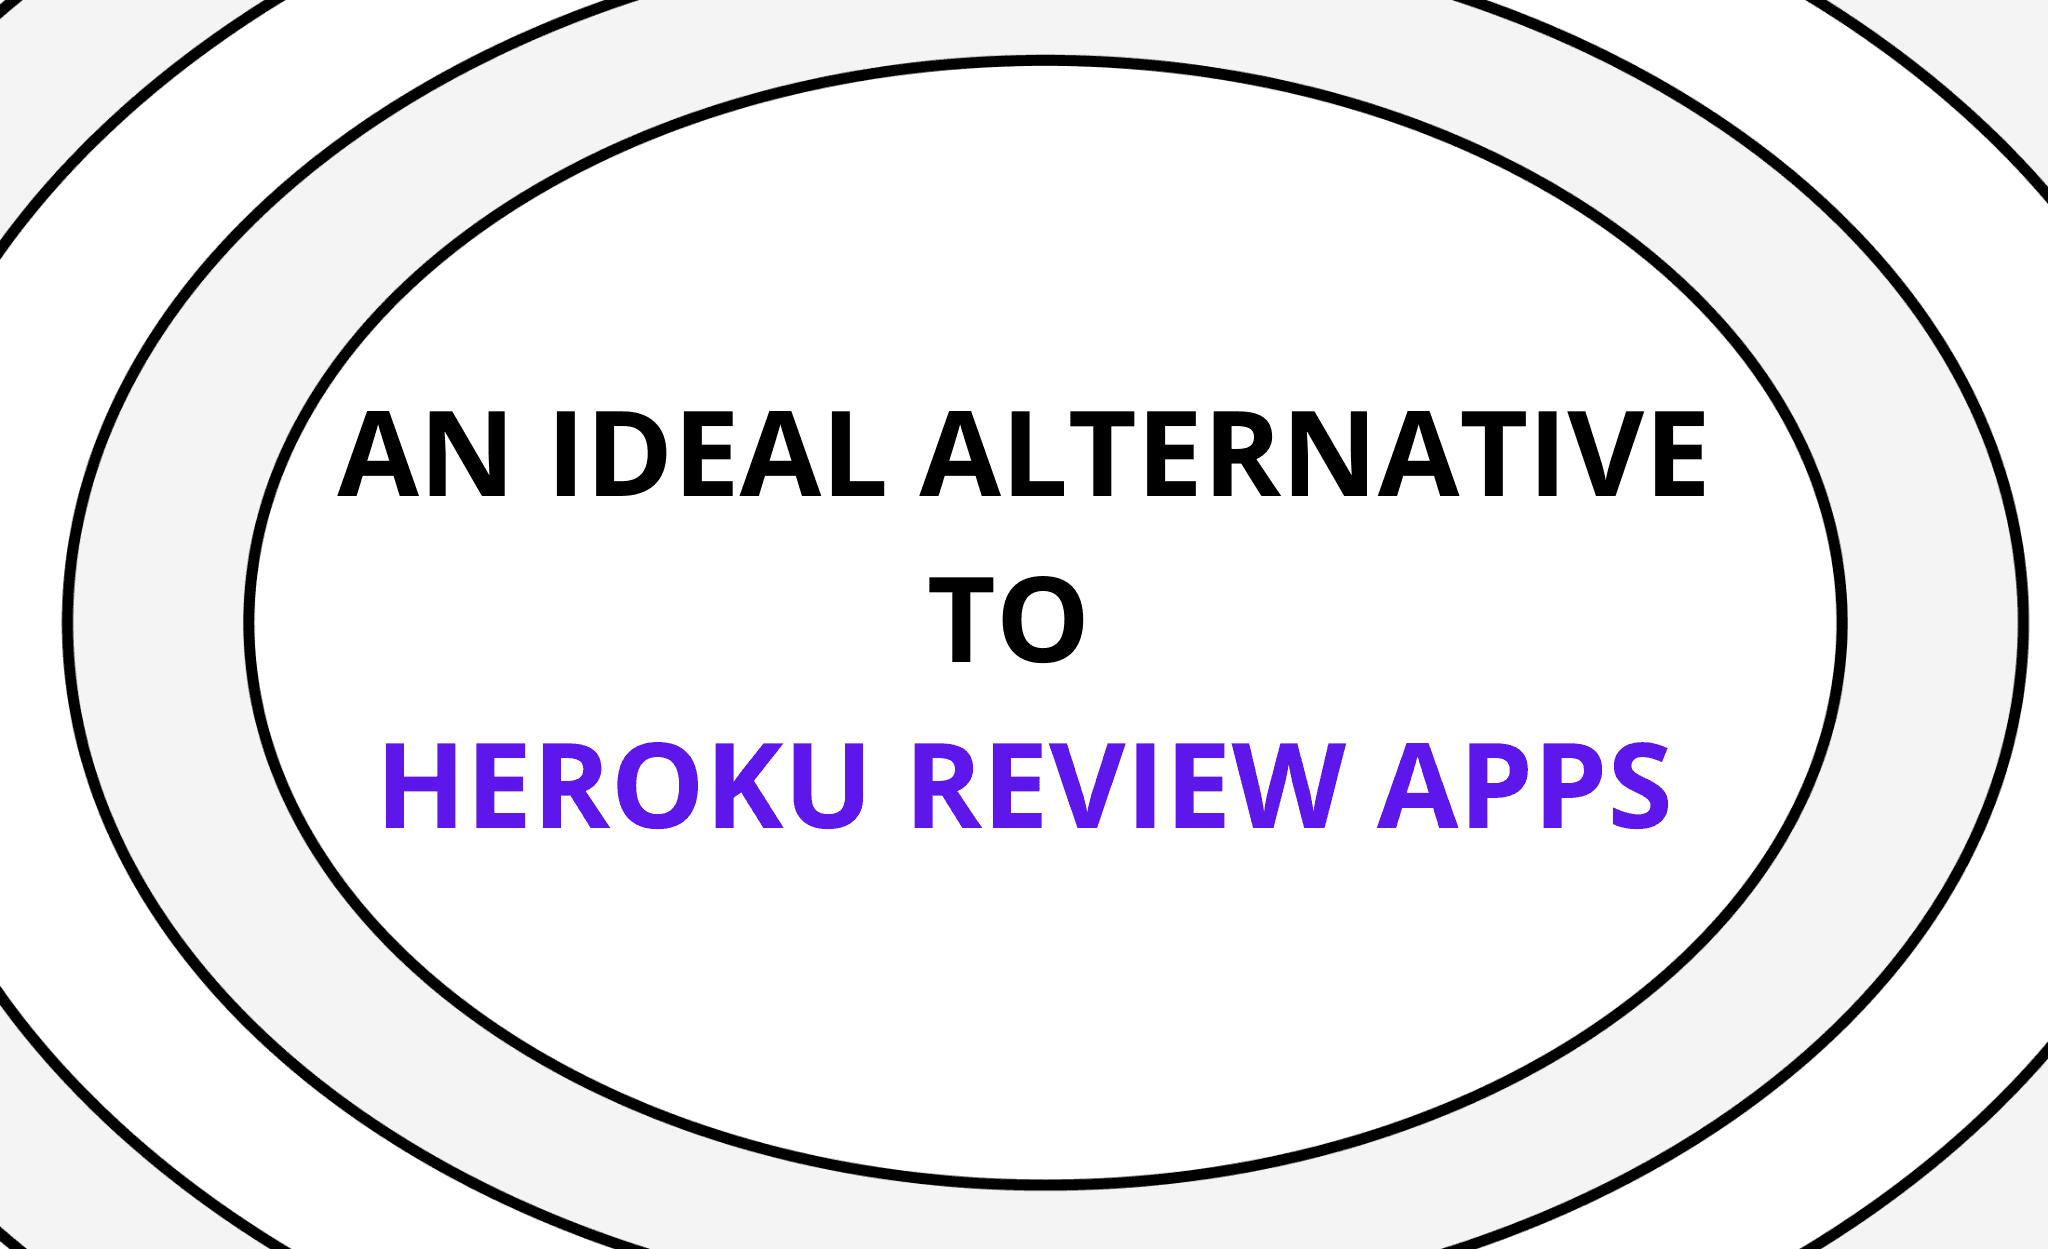 An Alternative to Heroku Review Apps